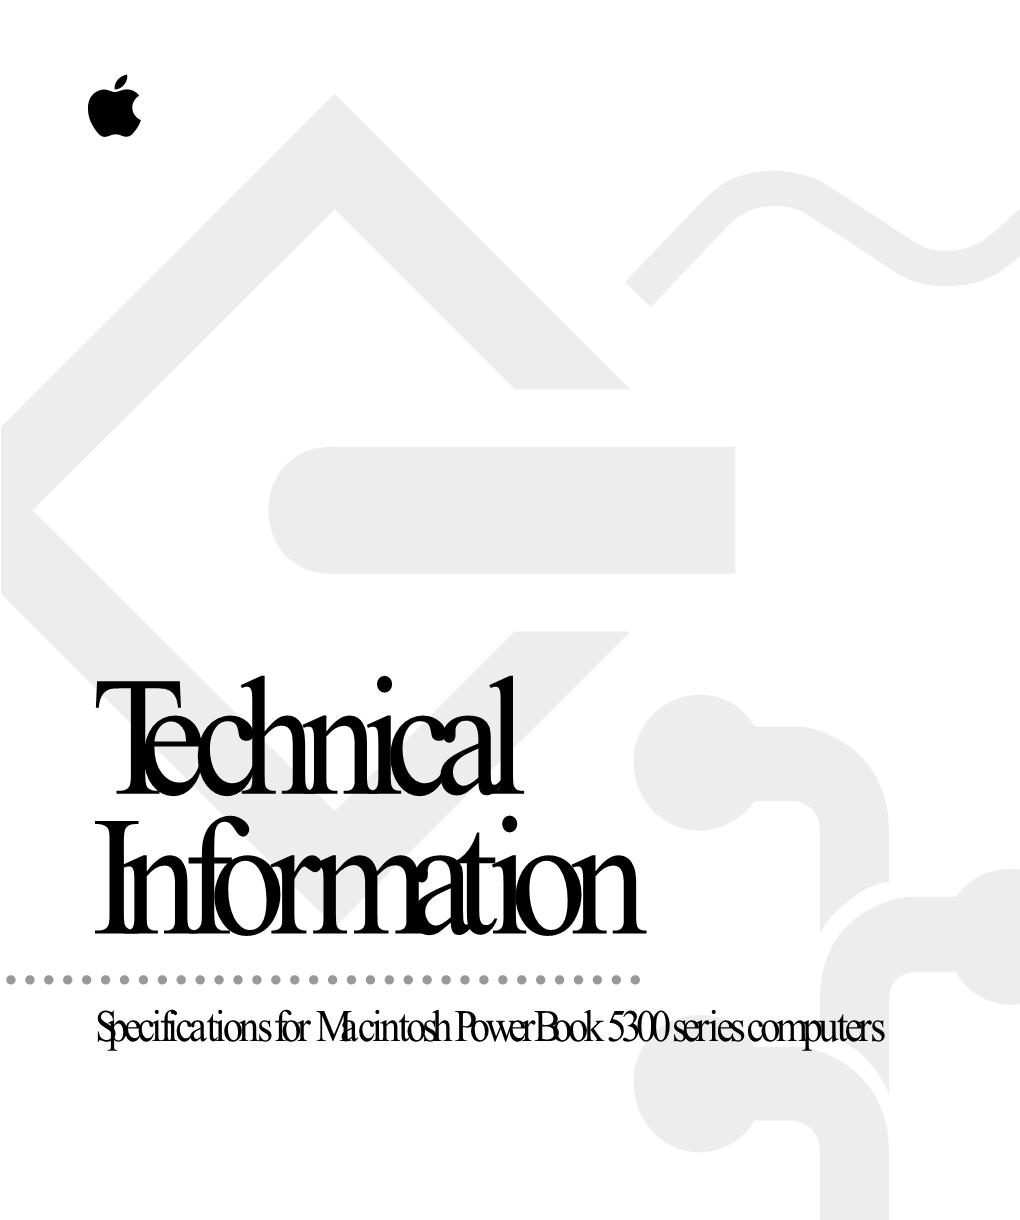 Specifications for Macintosh Powerbook 5300 Series Computers Technical Information